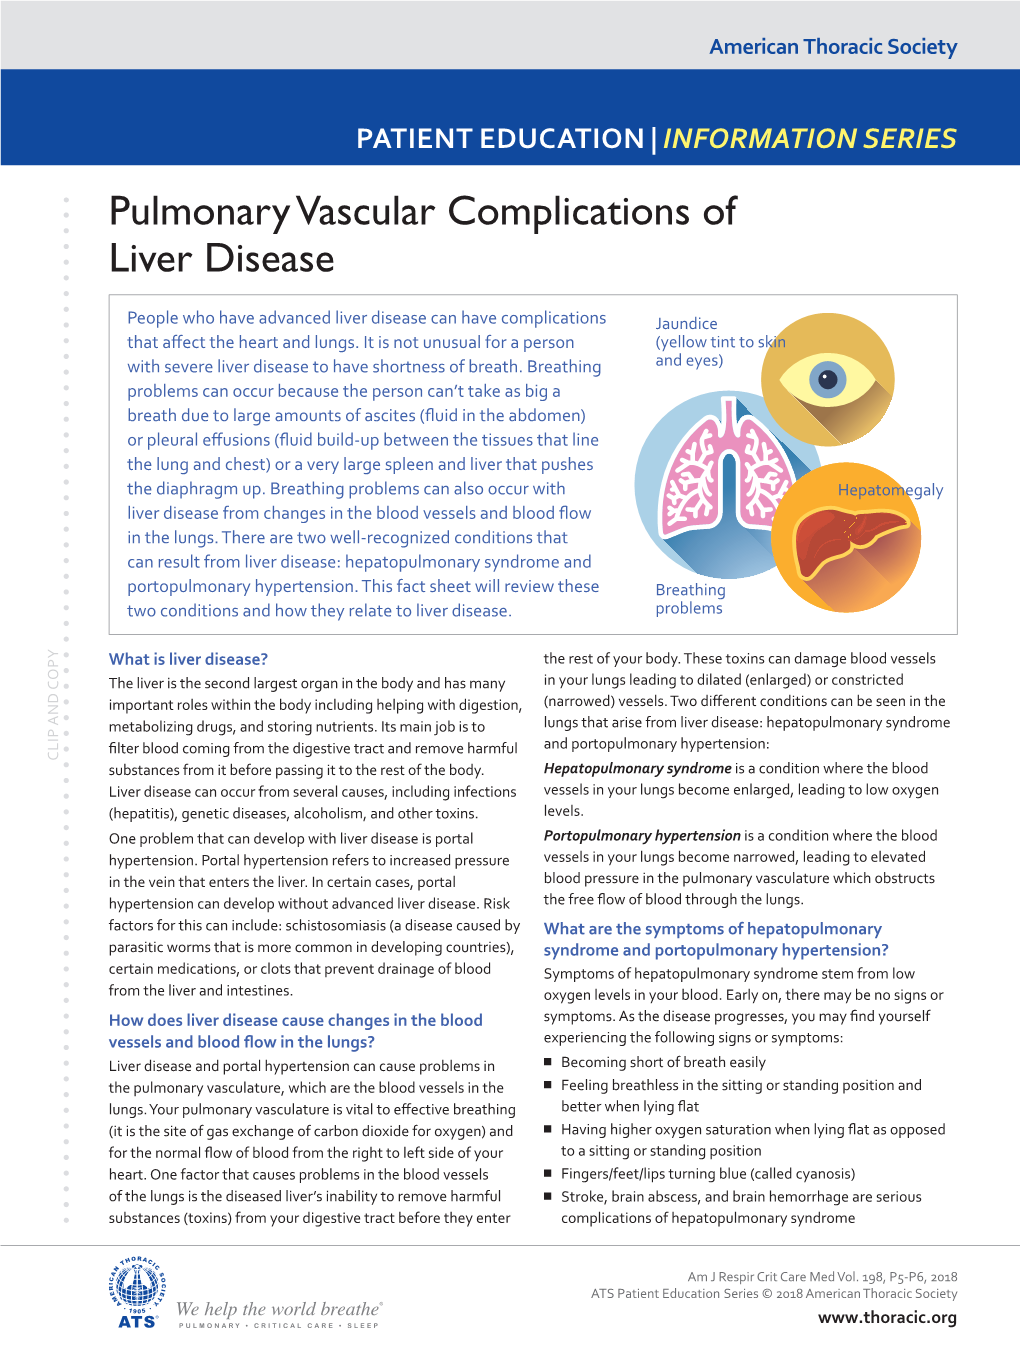 Pulmonary Vascular Complications of Liver Disease